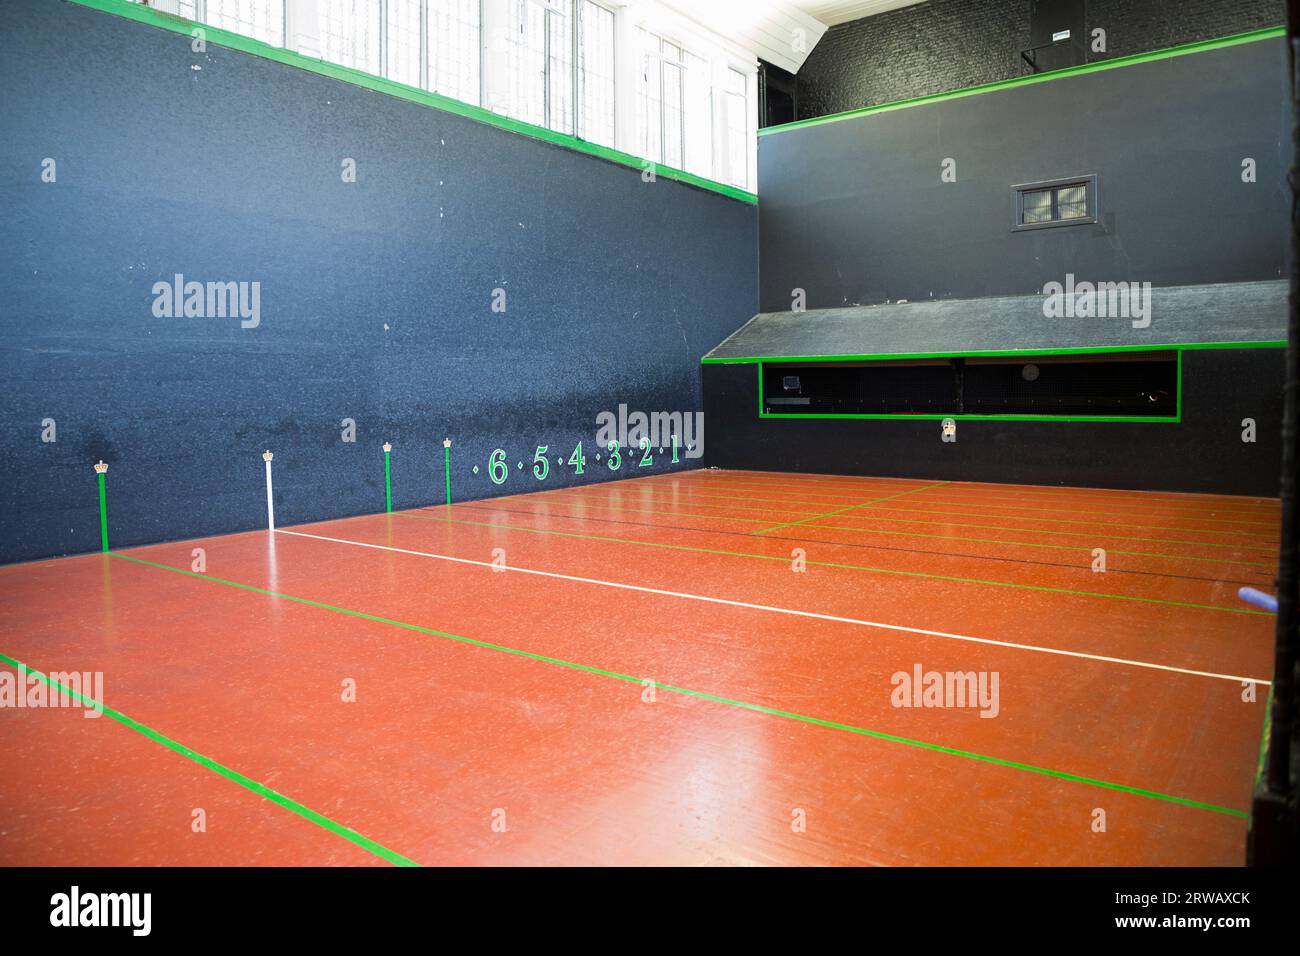 Interior / inside the Royal Tennis Court, Hampton Court Palace, a Grade I listed court for playing the sport of real tennis. (135) Stock Photo